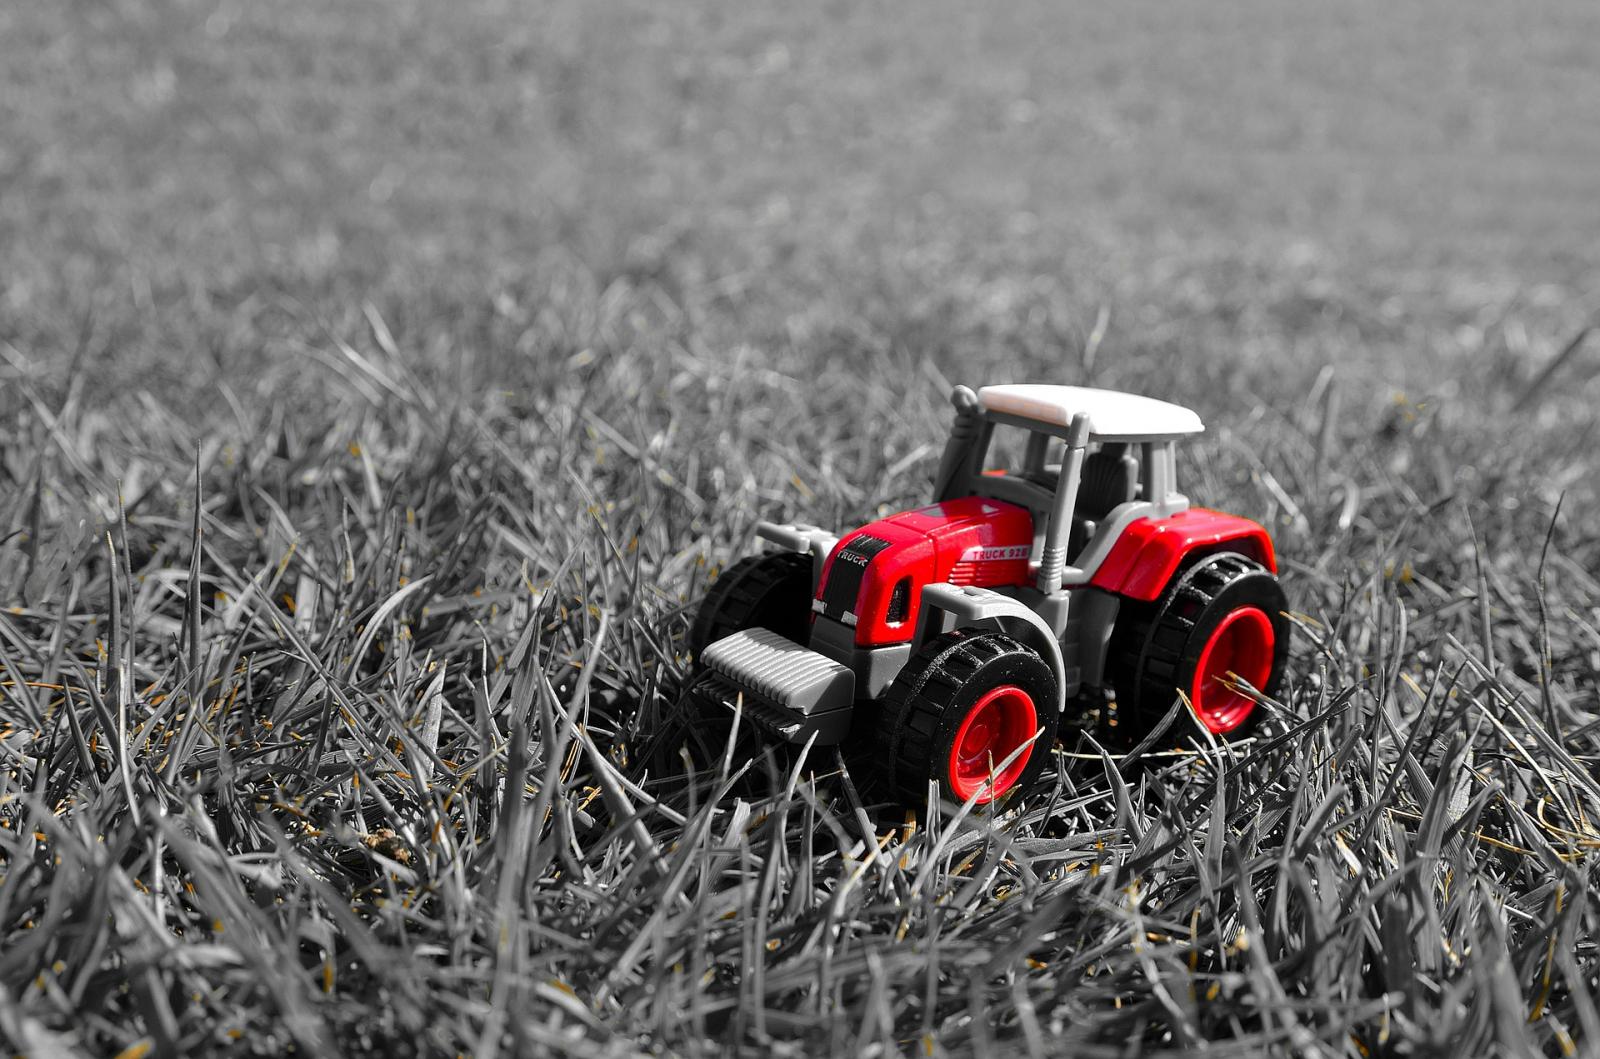 A red tractor. Photo credit: pixabay